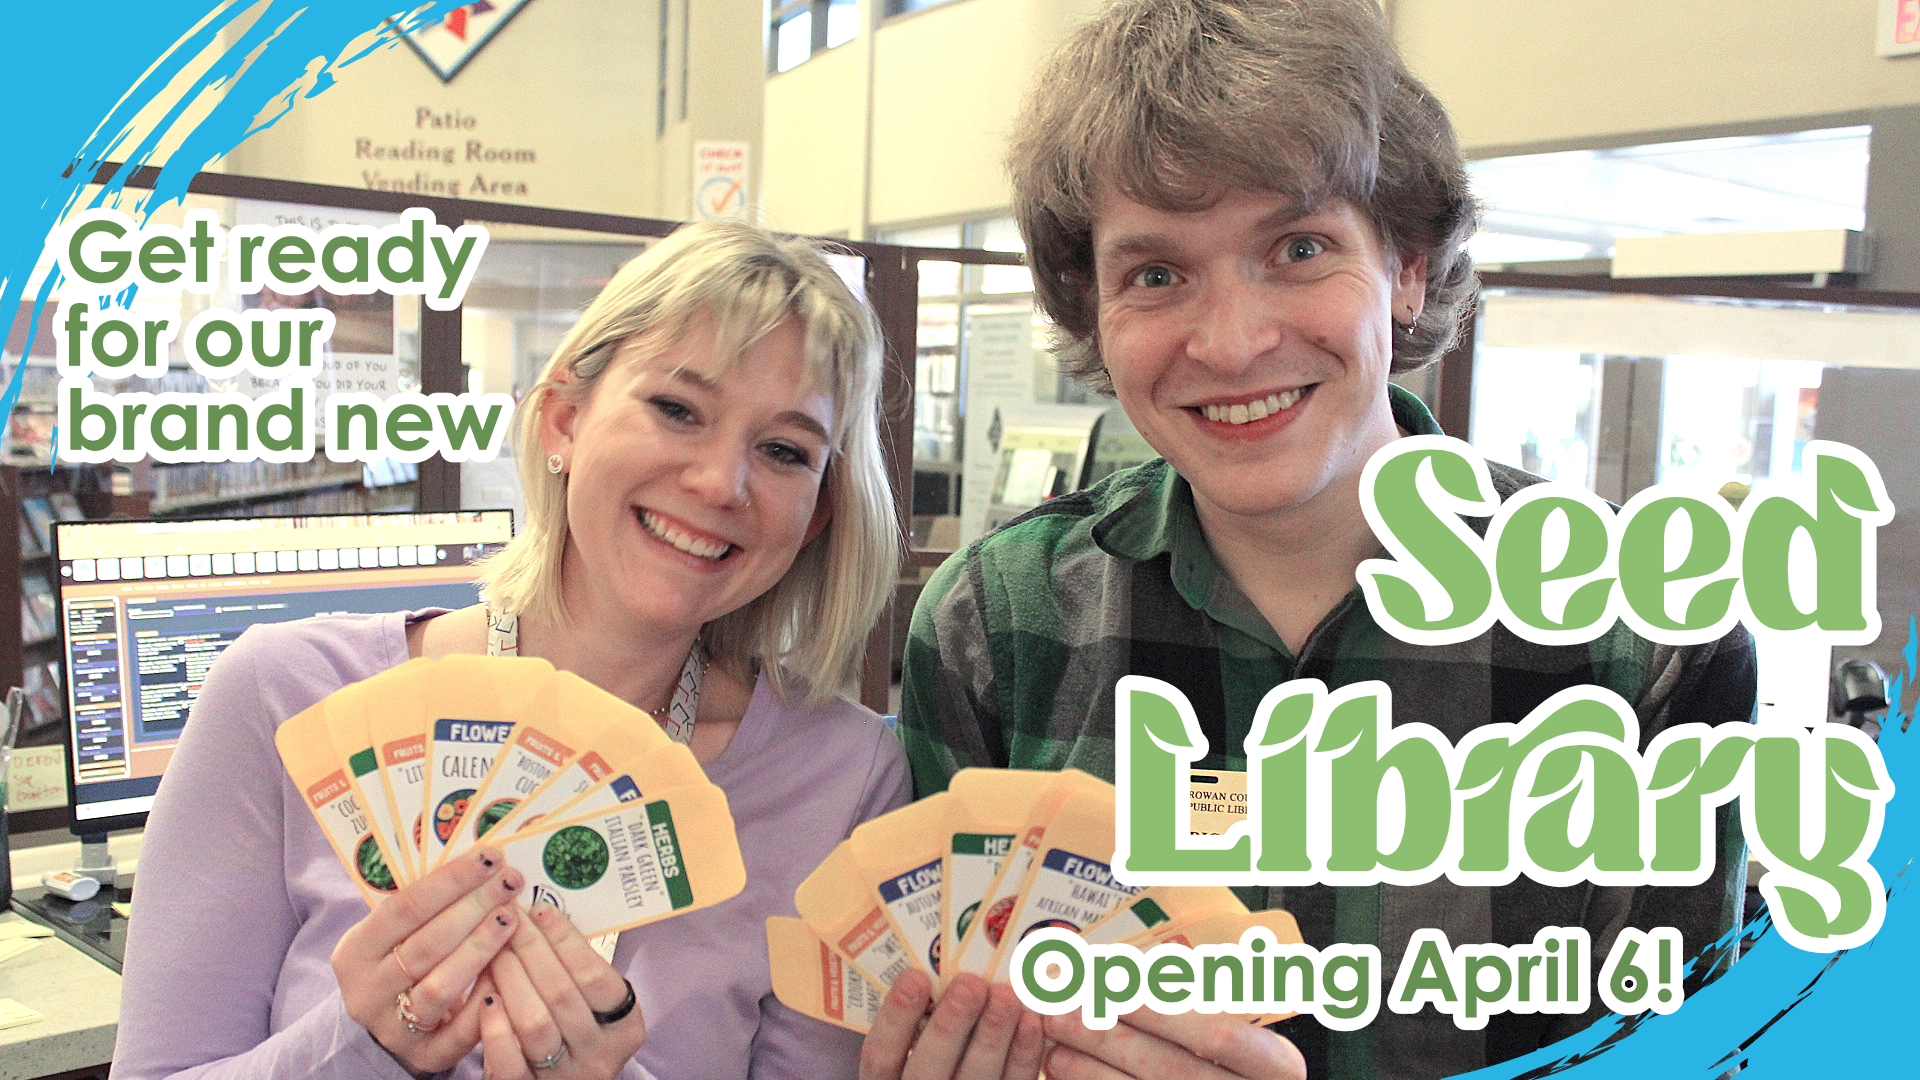 New Seed Library opening April 6th